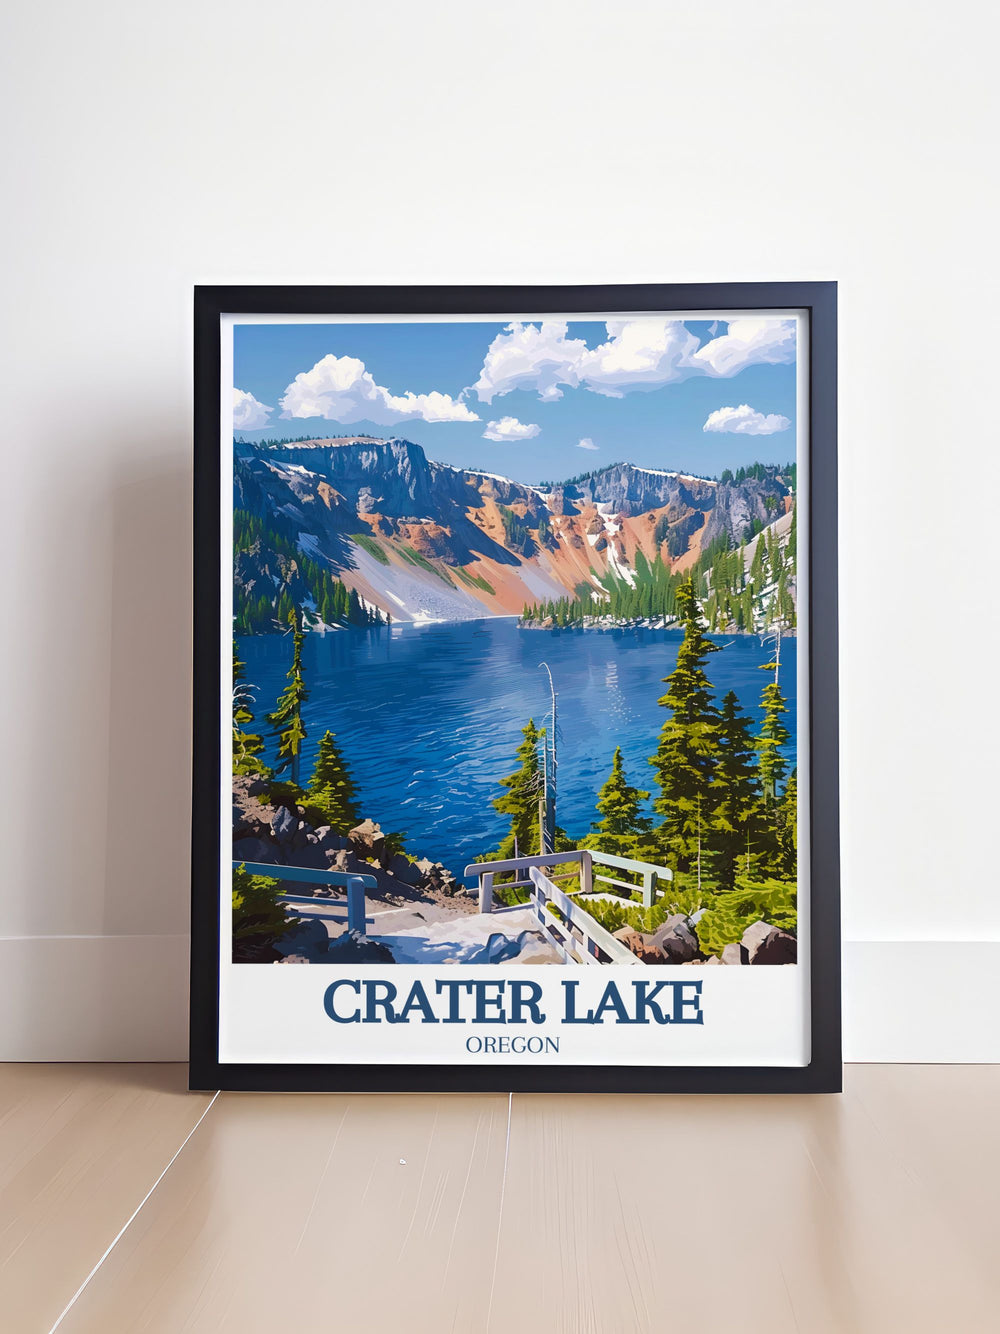 This national park poster captures the serene beauty of Crater Lake and the inviting waters of Cleetwood Cove, perfect for adding a touch of Oregons natural wonder to your decor.